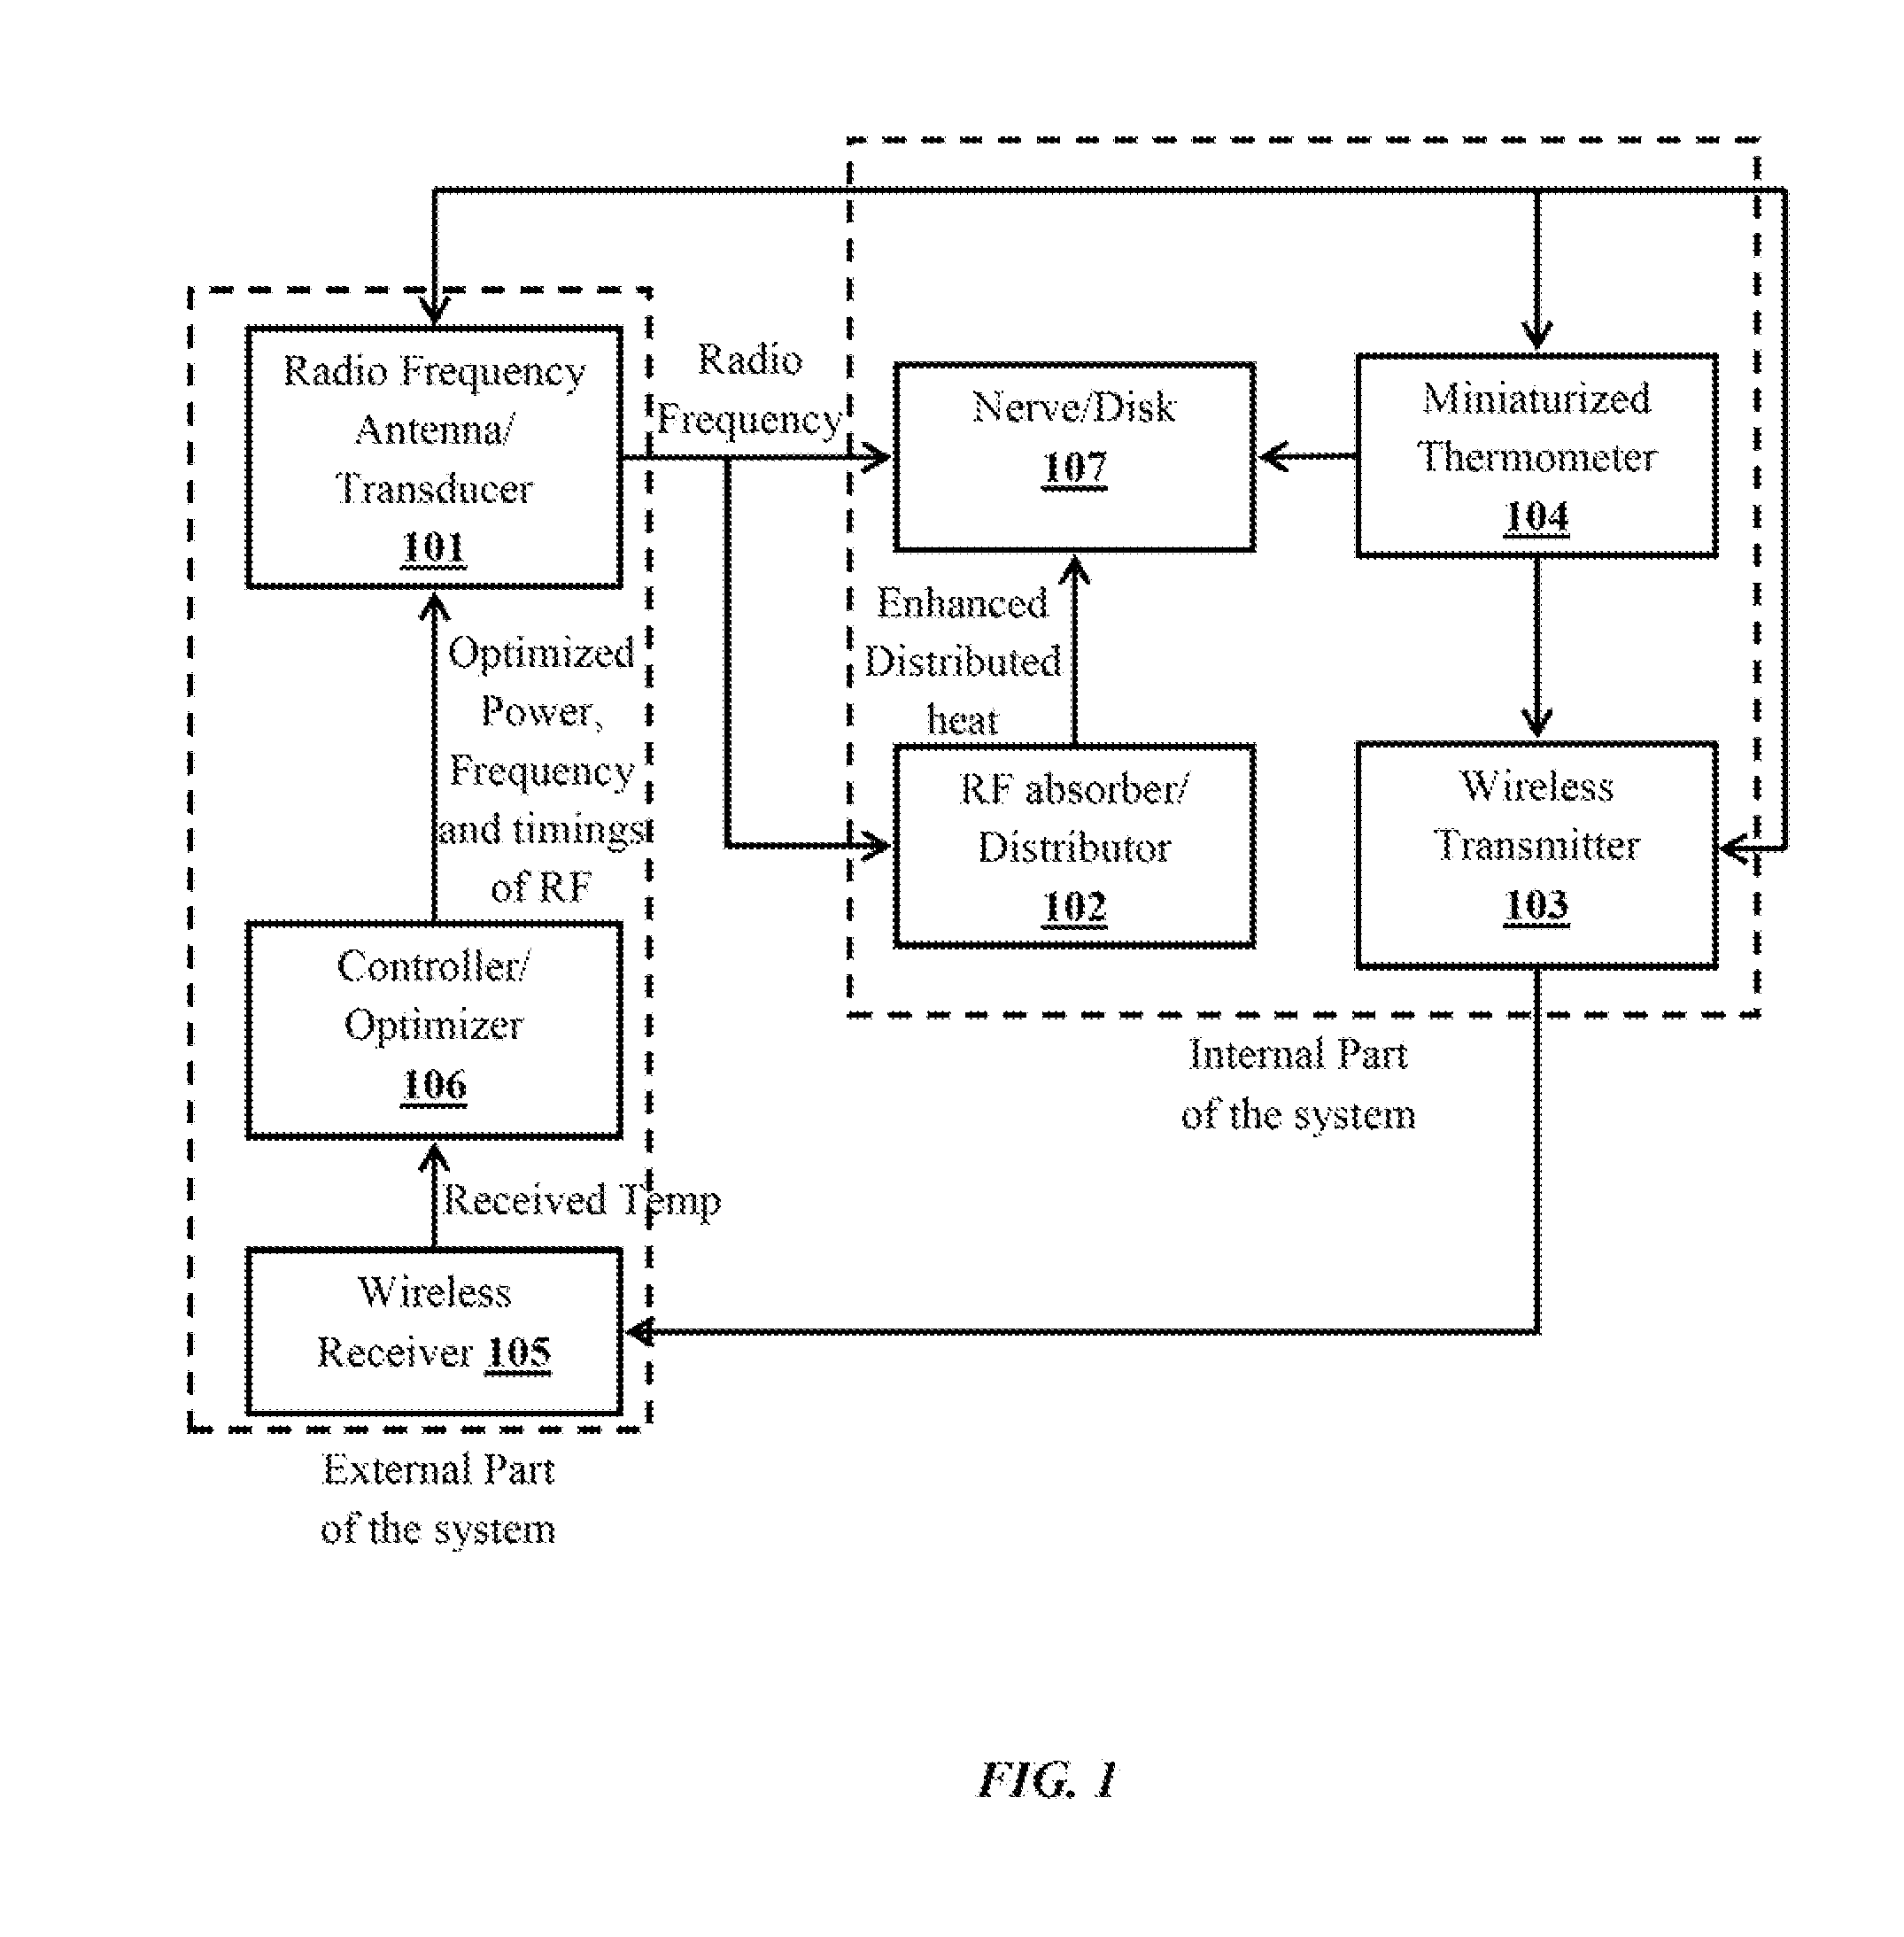 System and method for generating heat at target area of patient's body